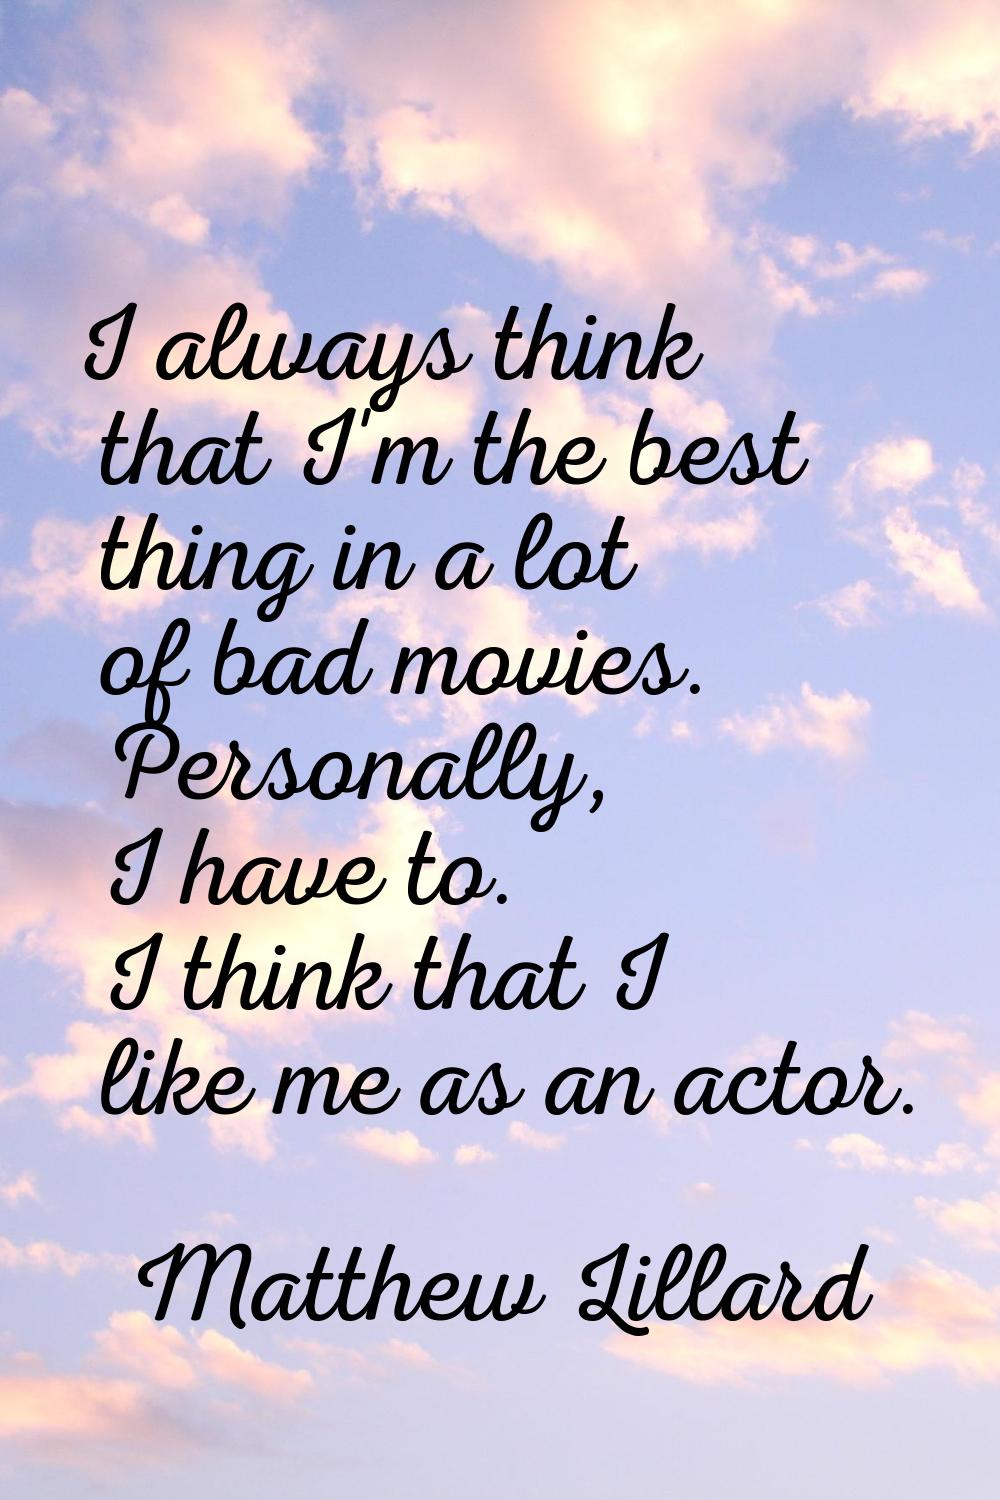 I always think that I'm the best thing in a lot of bad movies. Personally, I have to. I think that 